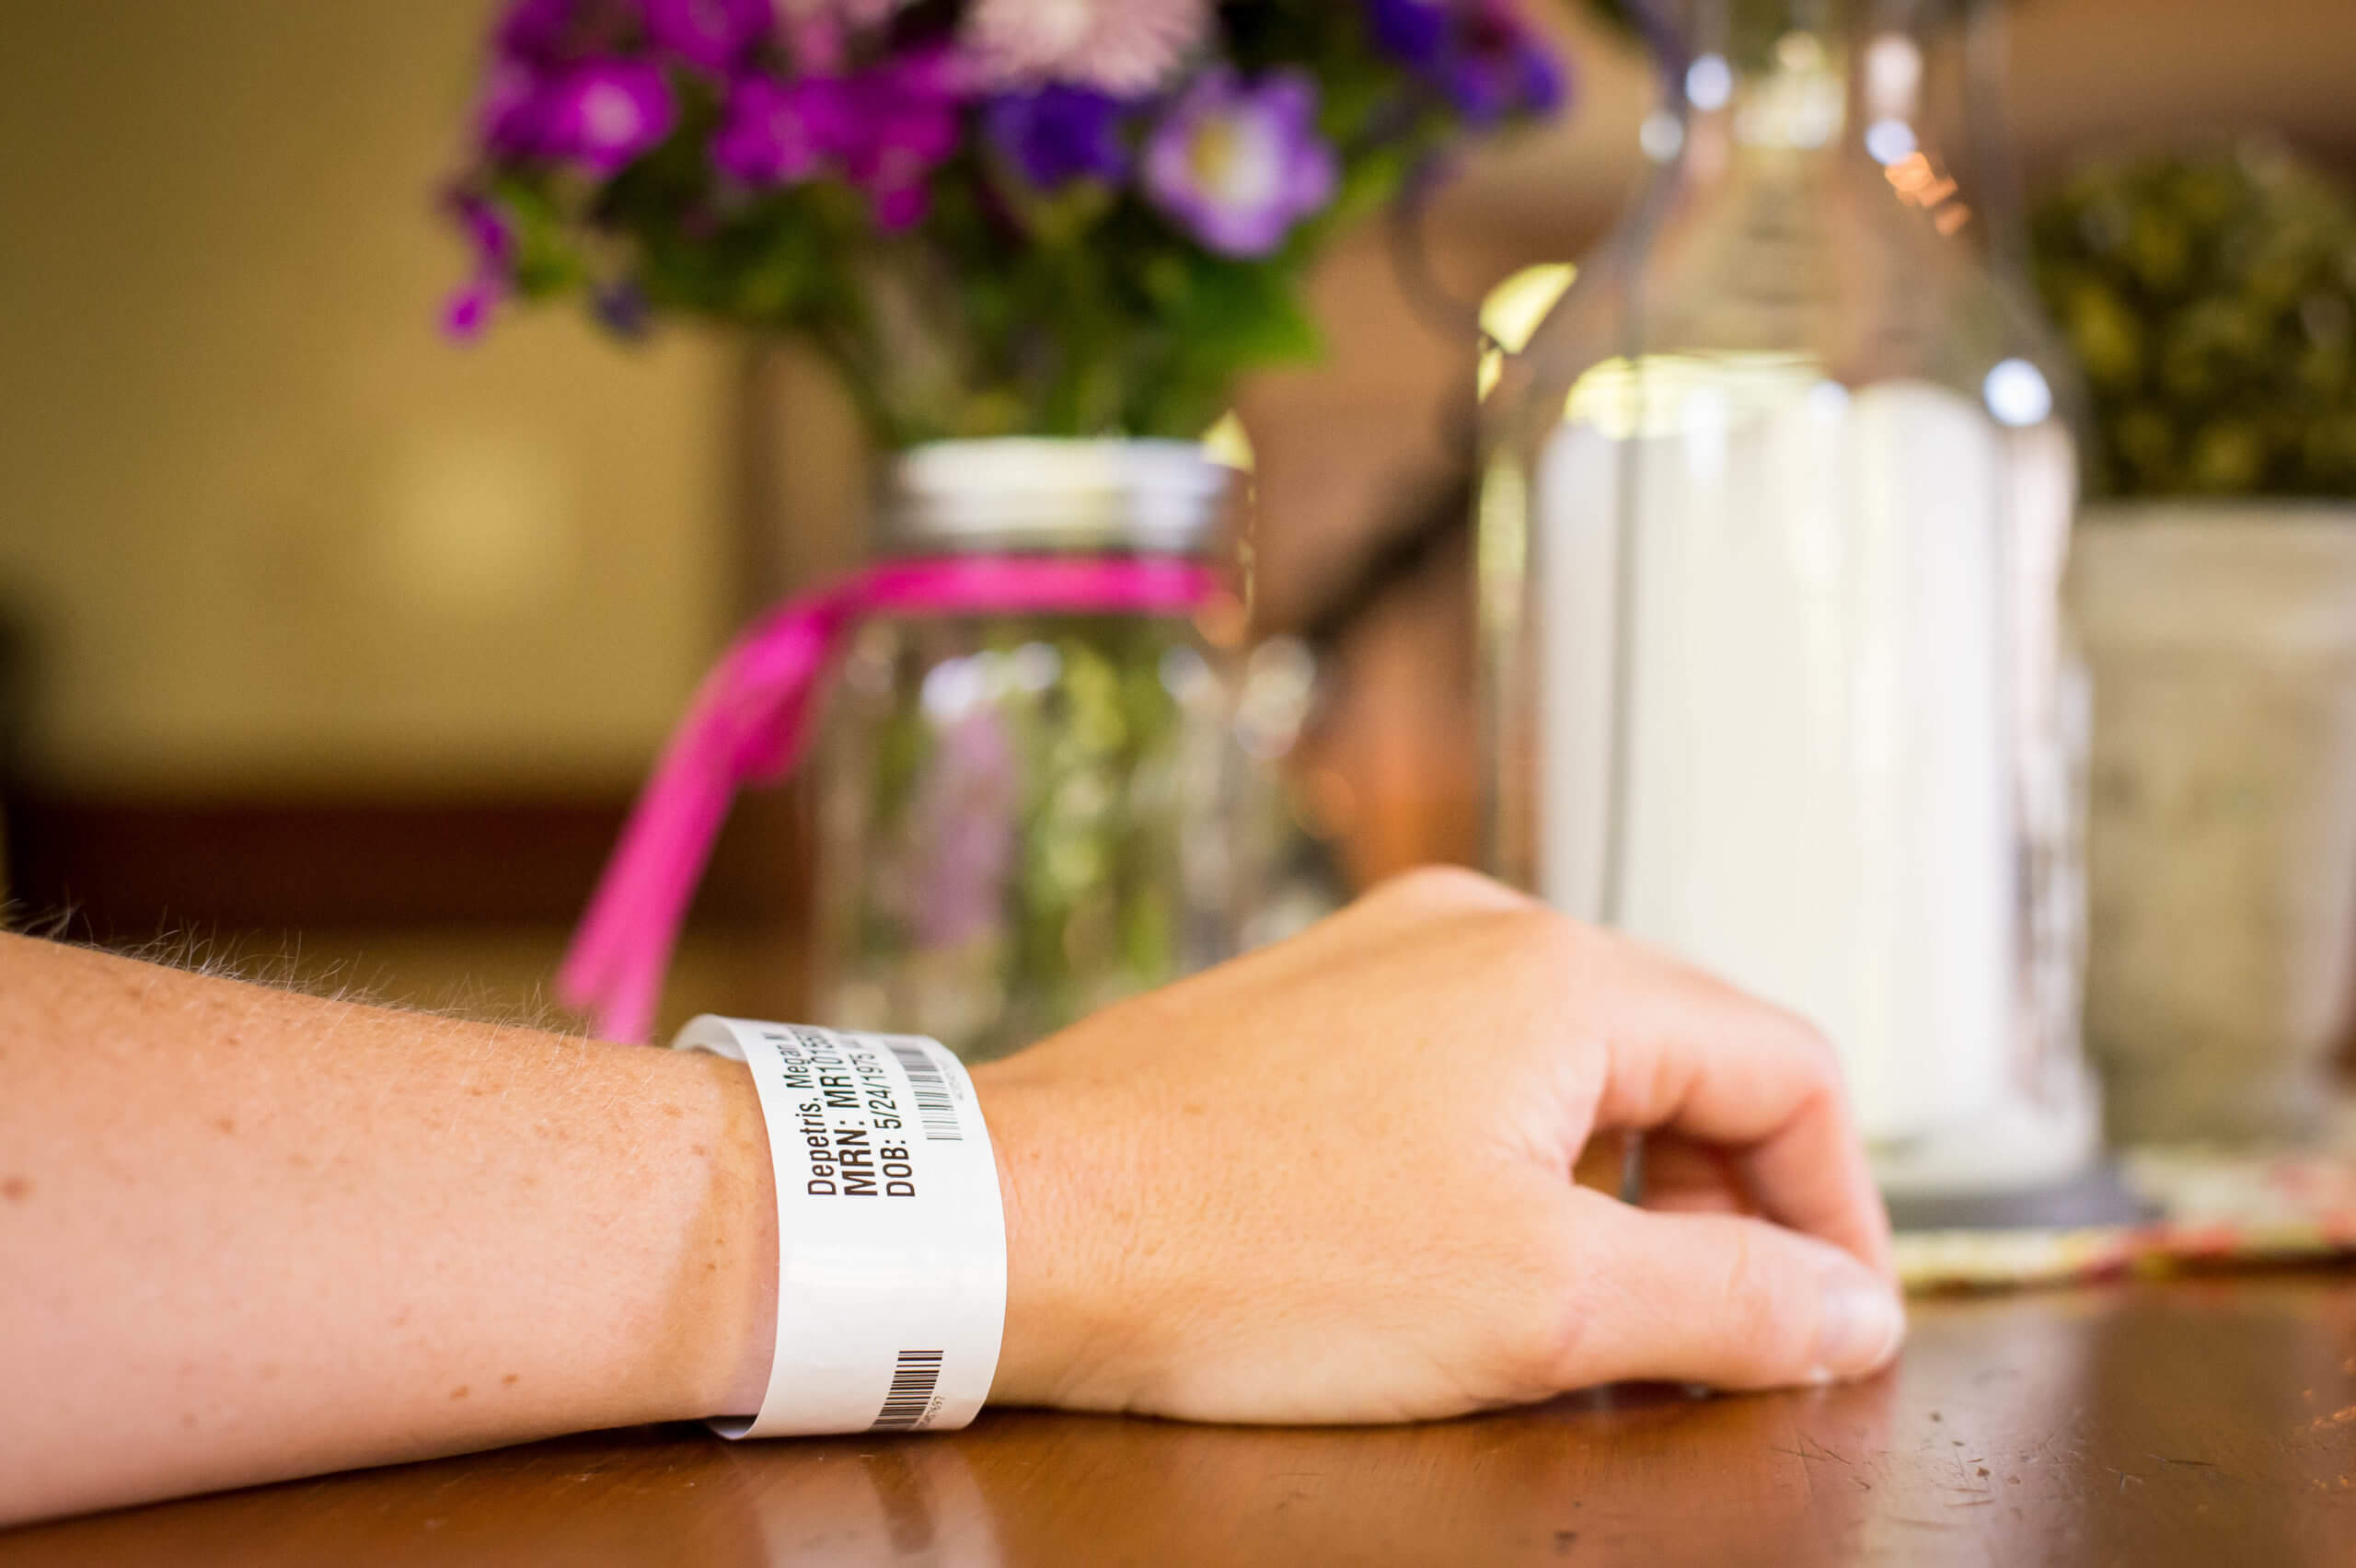 A focused view of an arm and hand on a table. On the wrist is a hospital identification bracelet.